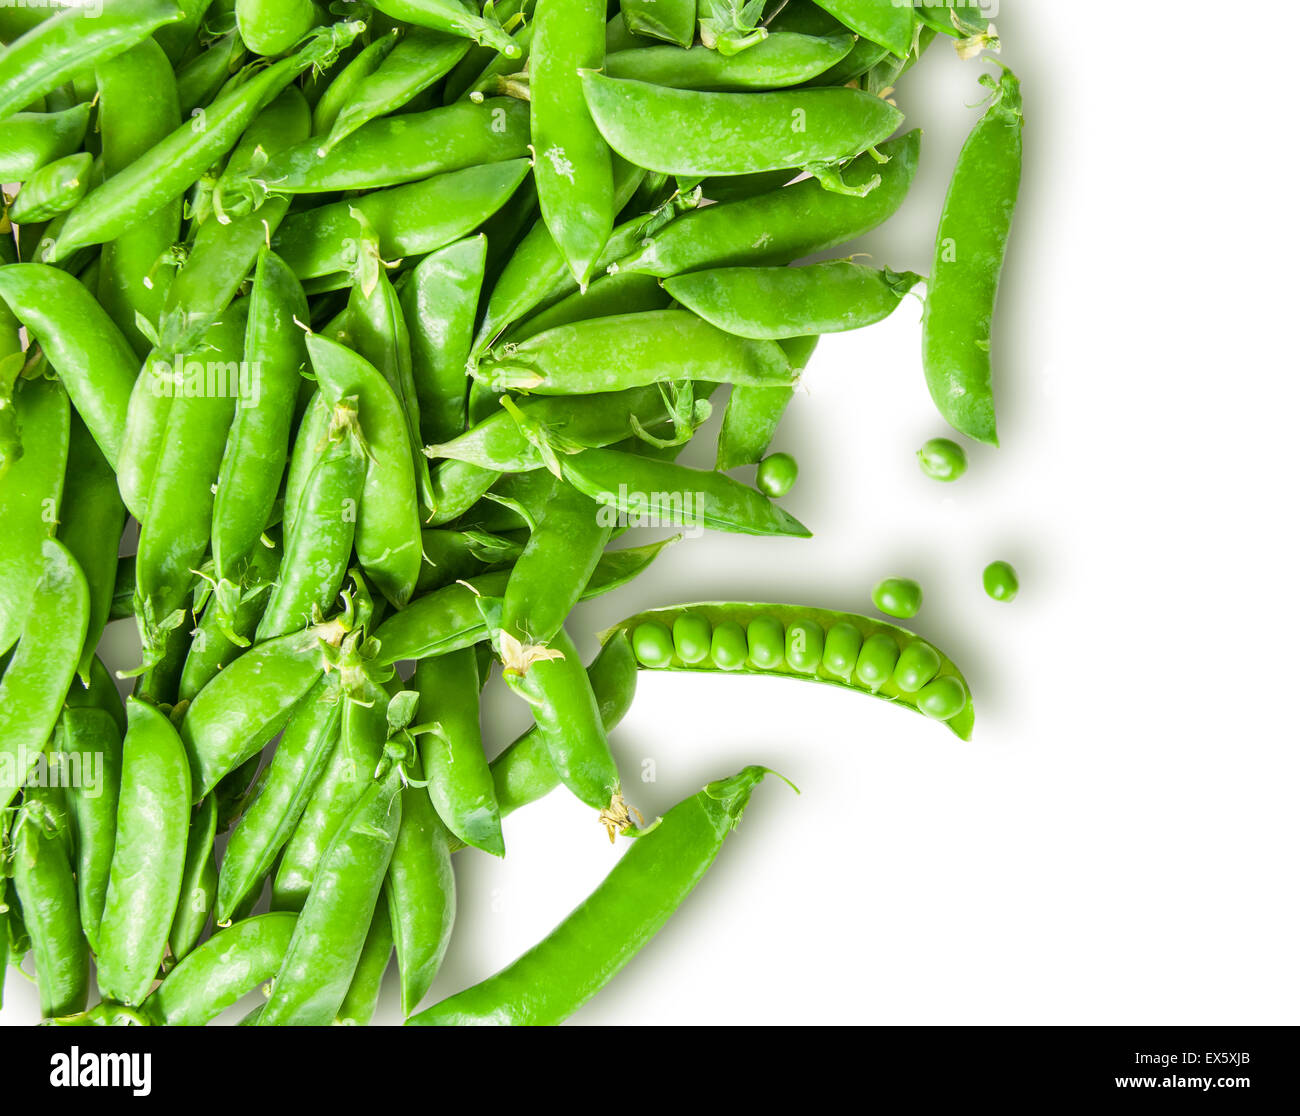 The scattered pods of green peas isolated on white background Stock Photo